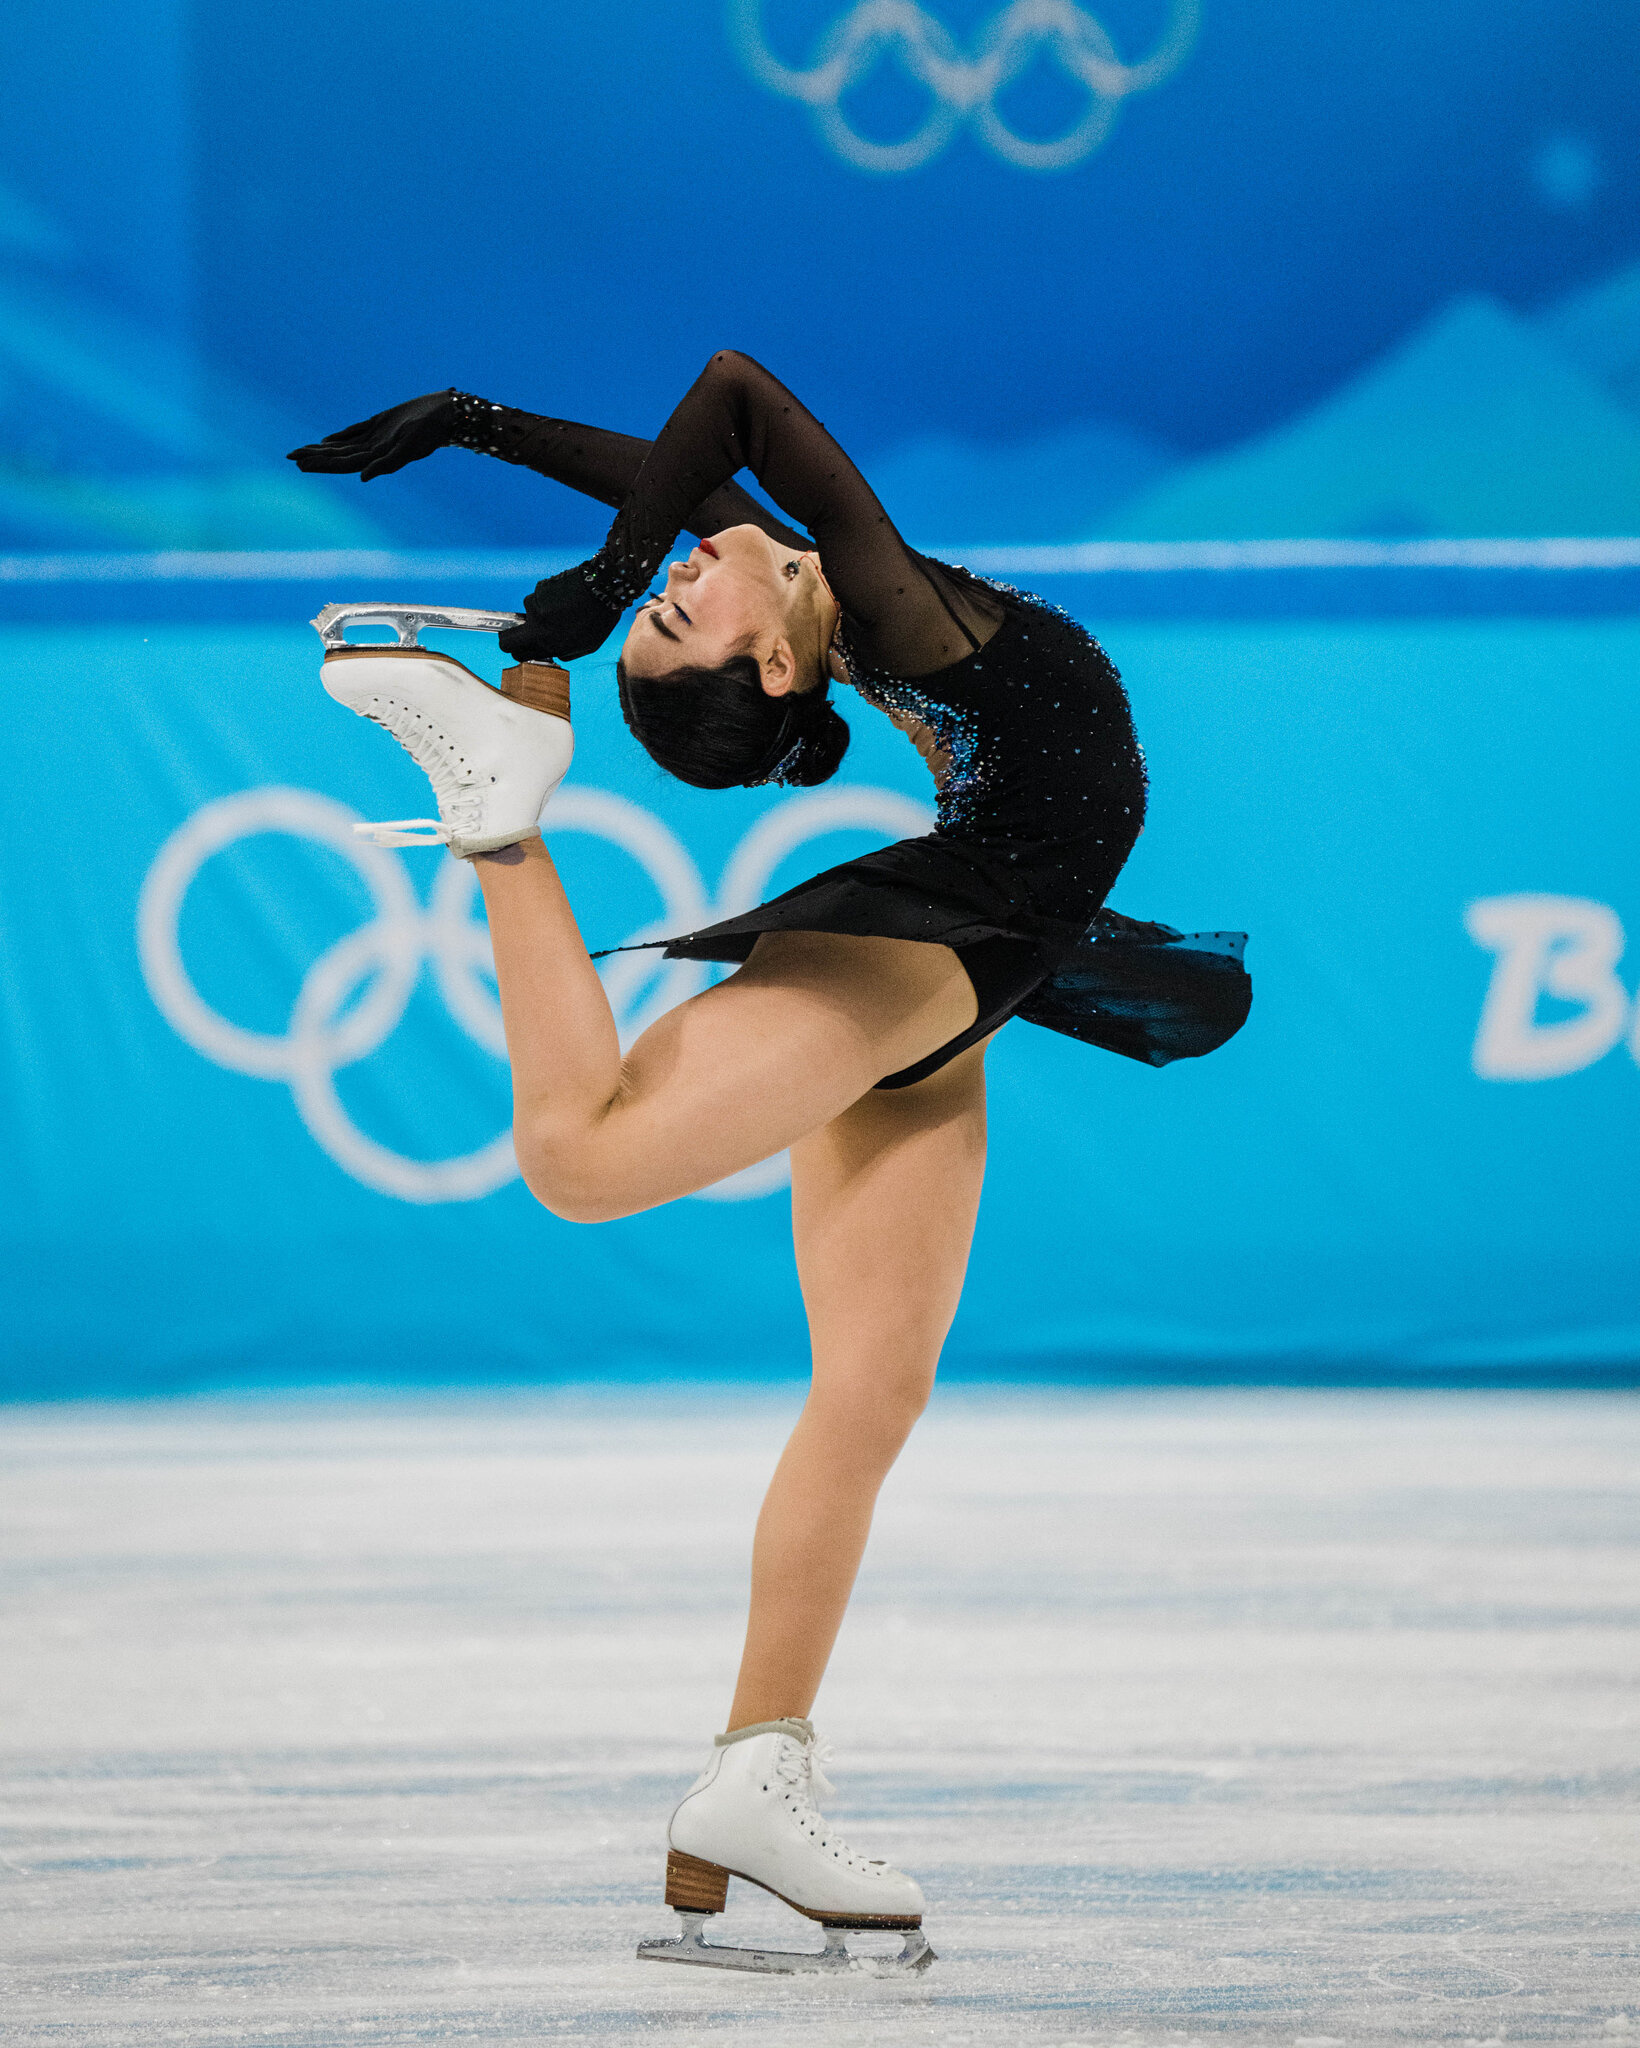 Single Skating: Zhu Yi at the 2022 Beijing Winter Olympic Games, Competitive sport. 1640x2050 HD Wallpaper.